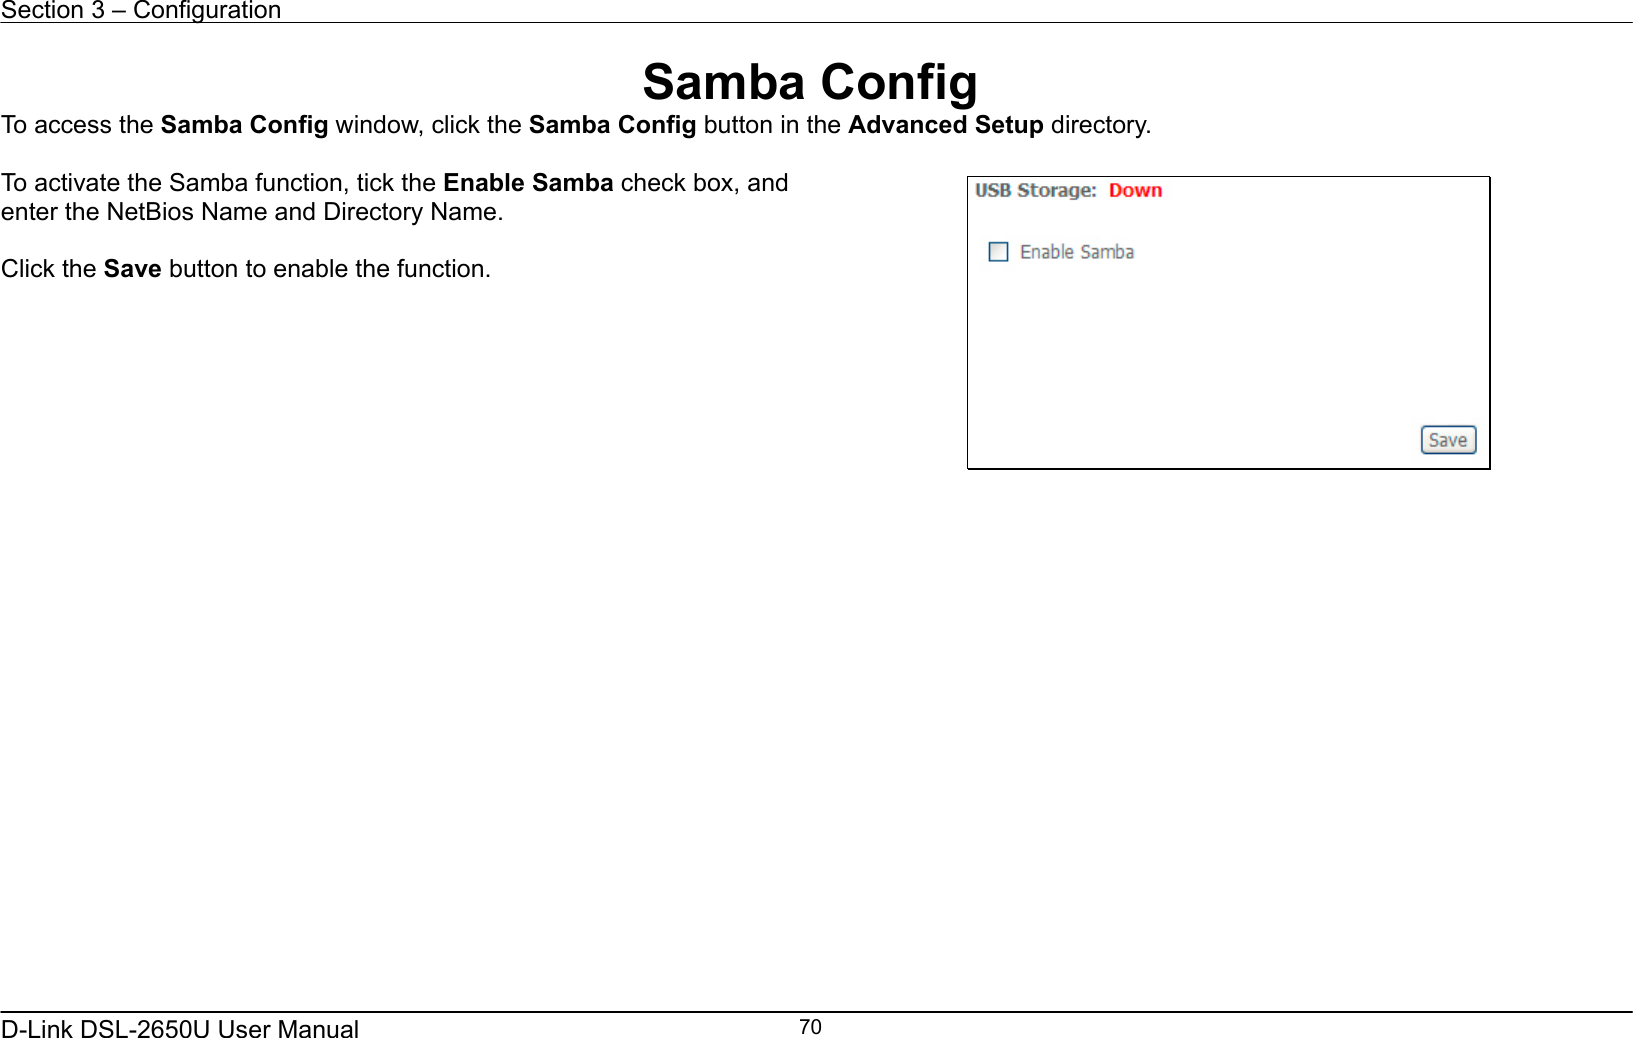 Section 3 – Configuration   D-Link DSL-2650U User Manual    70Samba Config To access the Samba Config window, click the Samba Config button in the Advanced Setup directory.  To activate the Samba function, tick the Enable Samba check box, and enter the NetBios Name and Directory Name.  Click the Save button to enable the function.                    